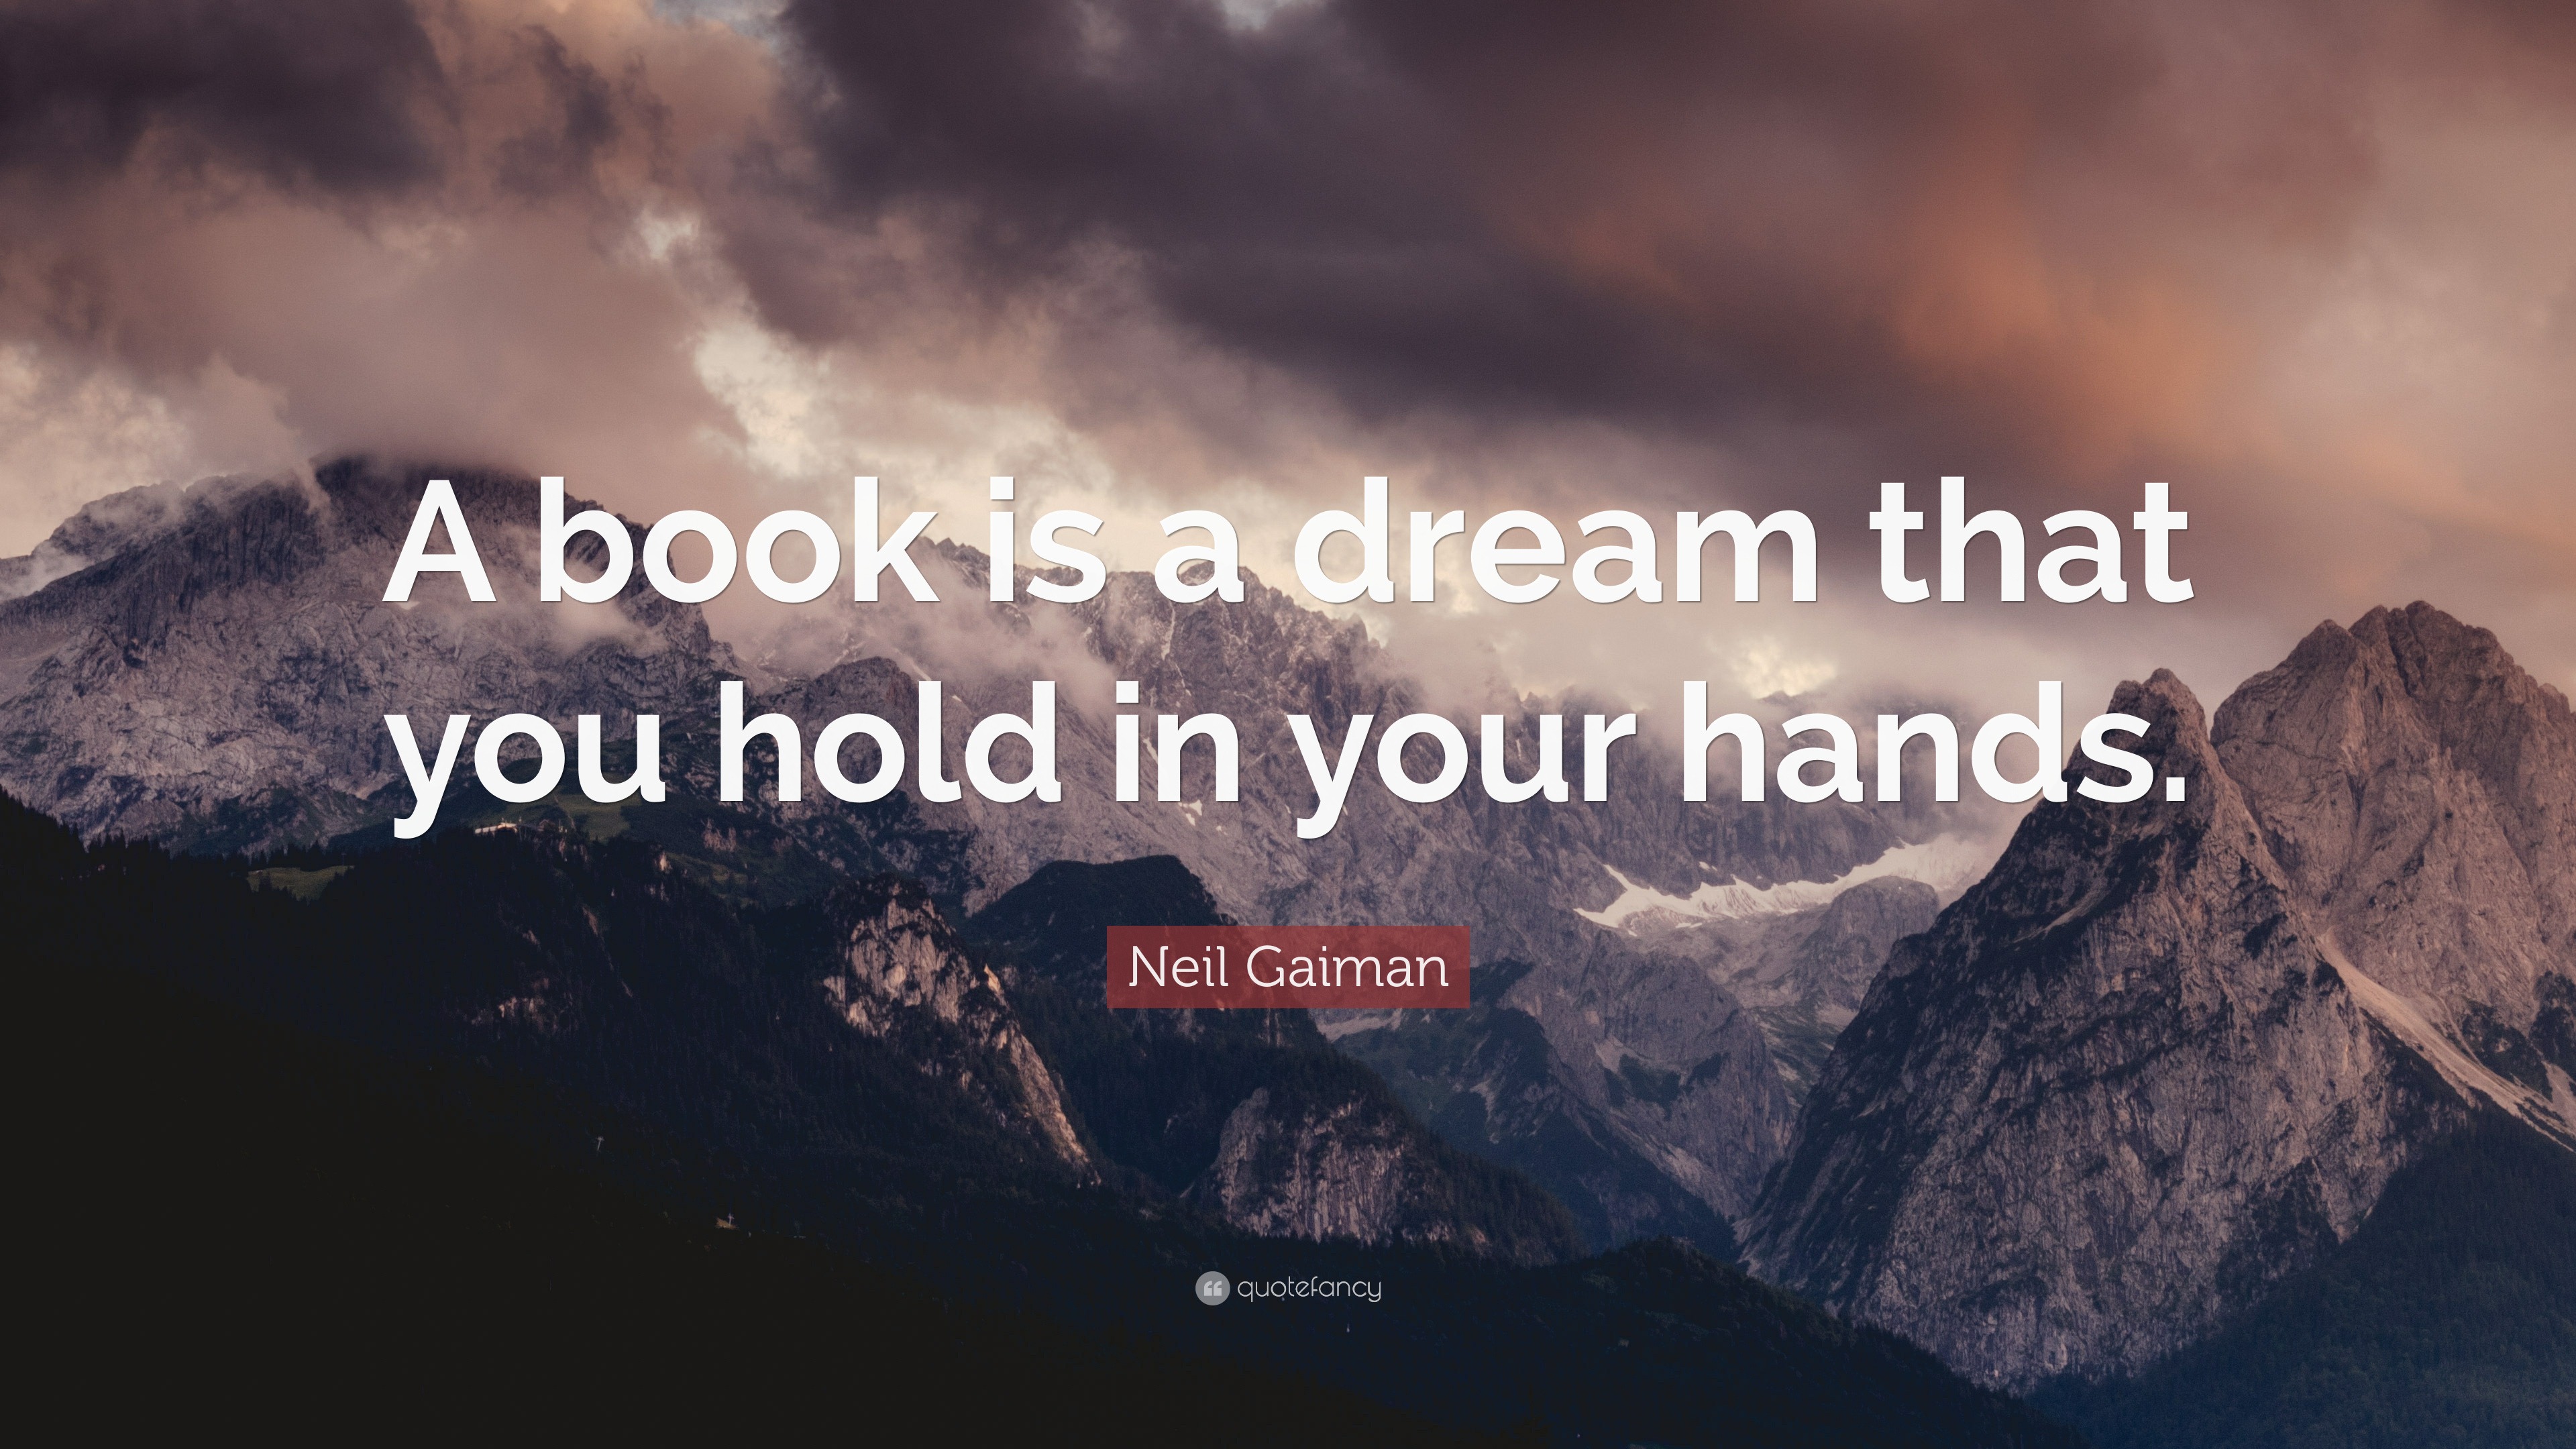 Neil Gaiman Quote: “A book is a dream that you hold in your hands.”